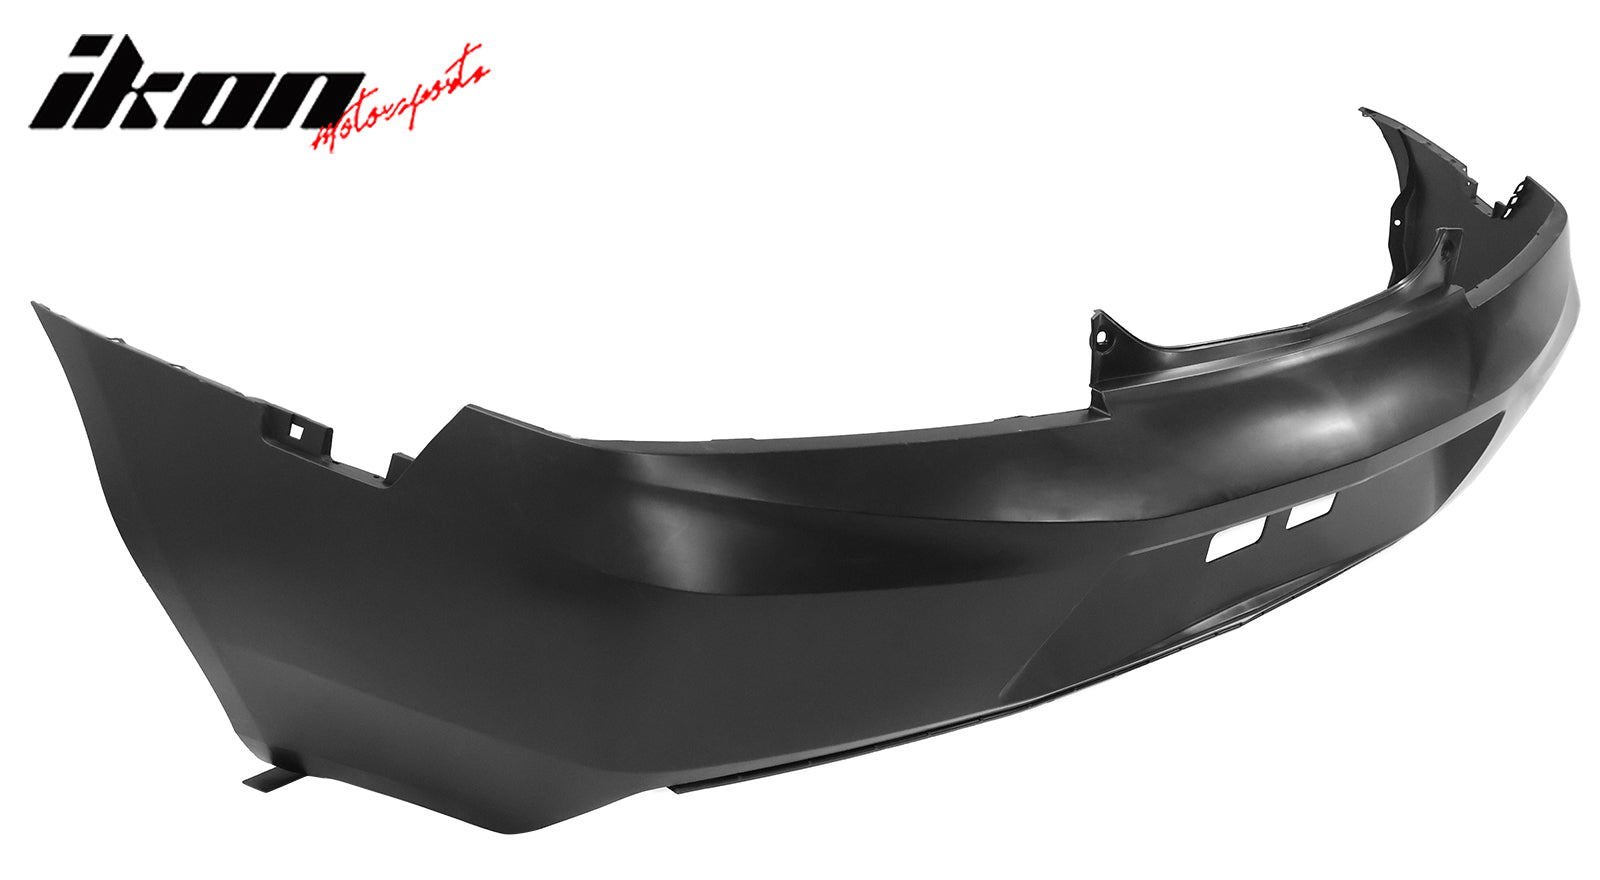 IKON MOTORSPORTS, Rear Bumper Cover Compatible With 2014-2015 Chevrolet Camaro, 6th ZL1 Style Unpainted Bumper Conversion Guard Bodykit - PP Polypropylene